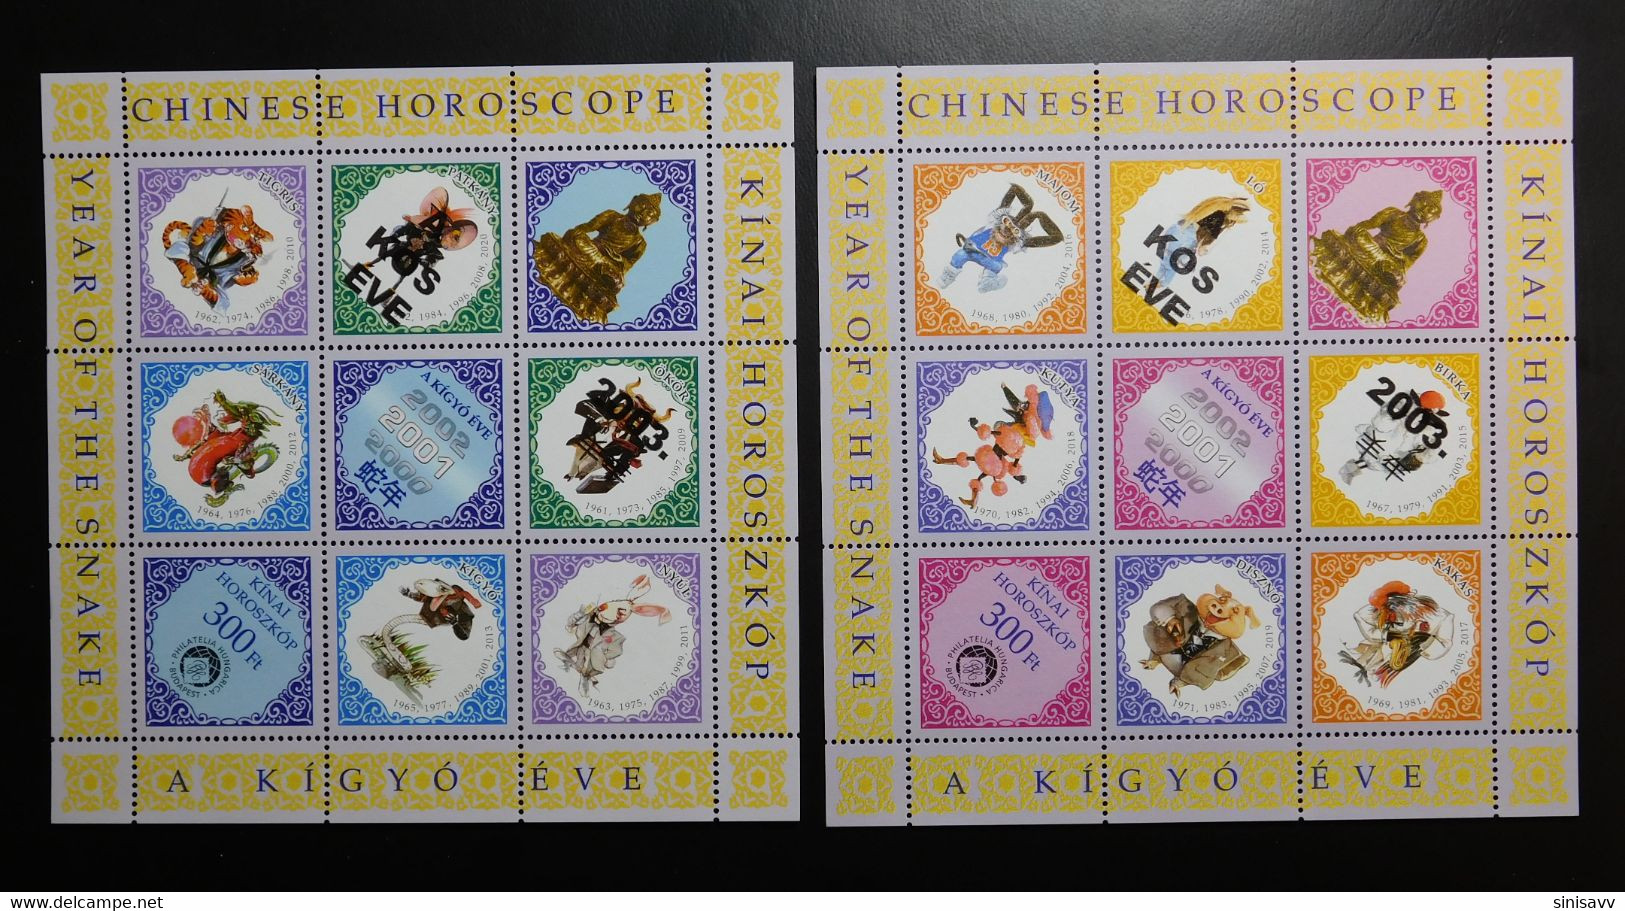 HUNGARY - 2003 - Commemorative Sheet Pair - Chinese Horoscope / Year Of The Ram MNH! - Feuillets Souvenir